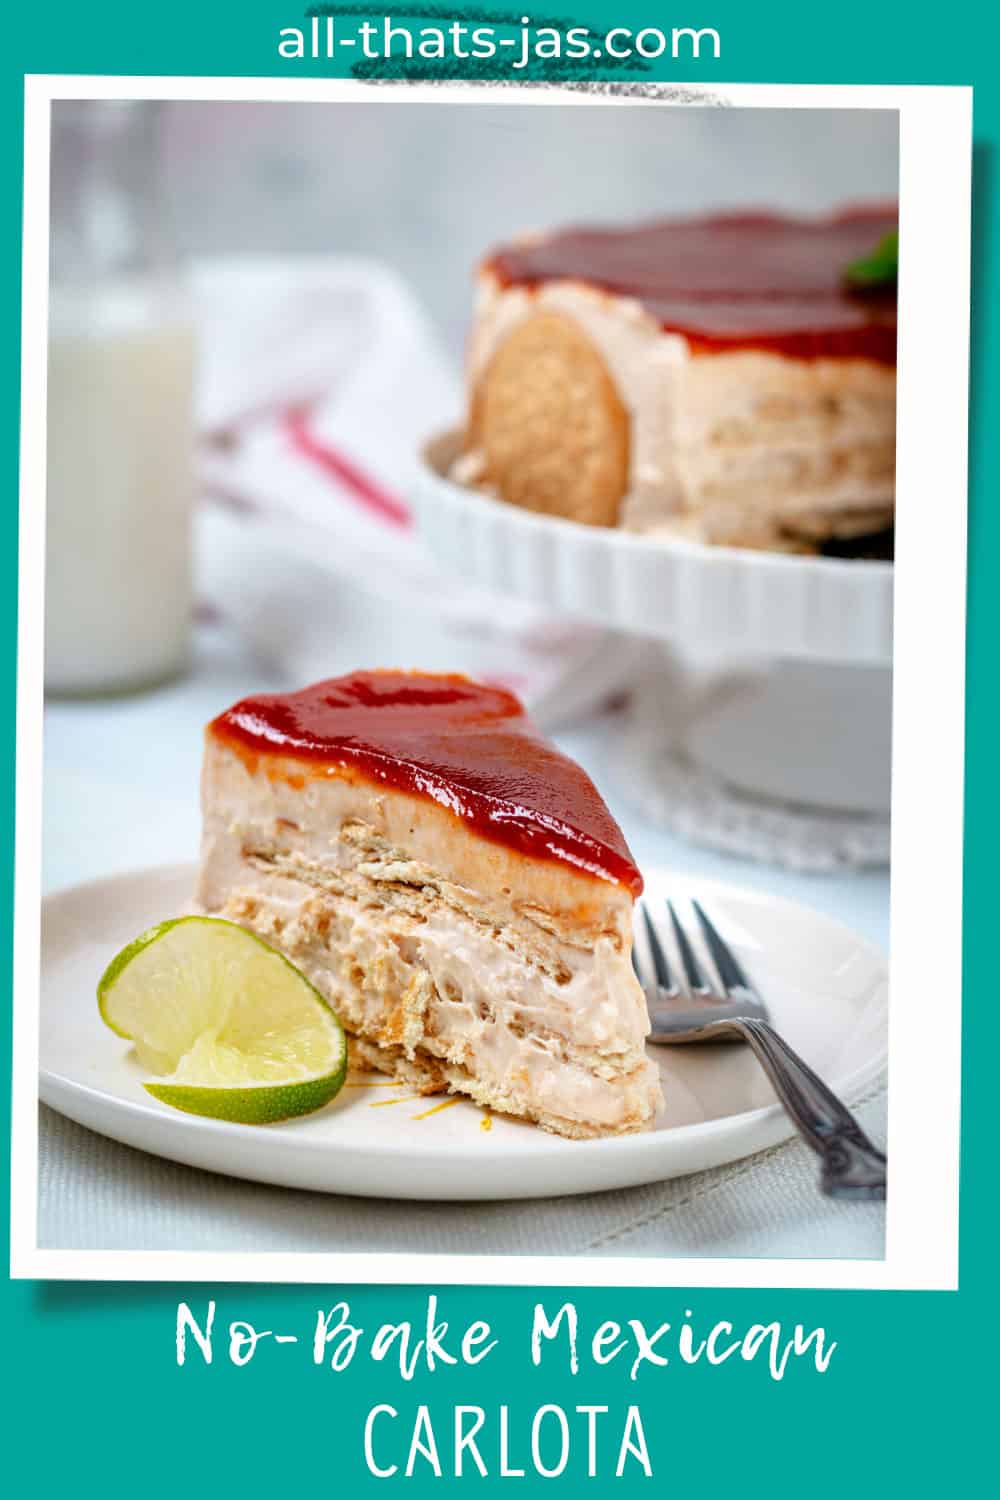 A slice of Mexican guava Charlotte cake with text overlay.